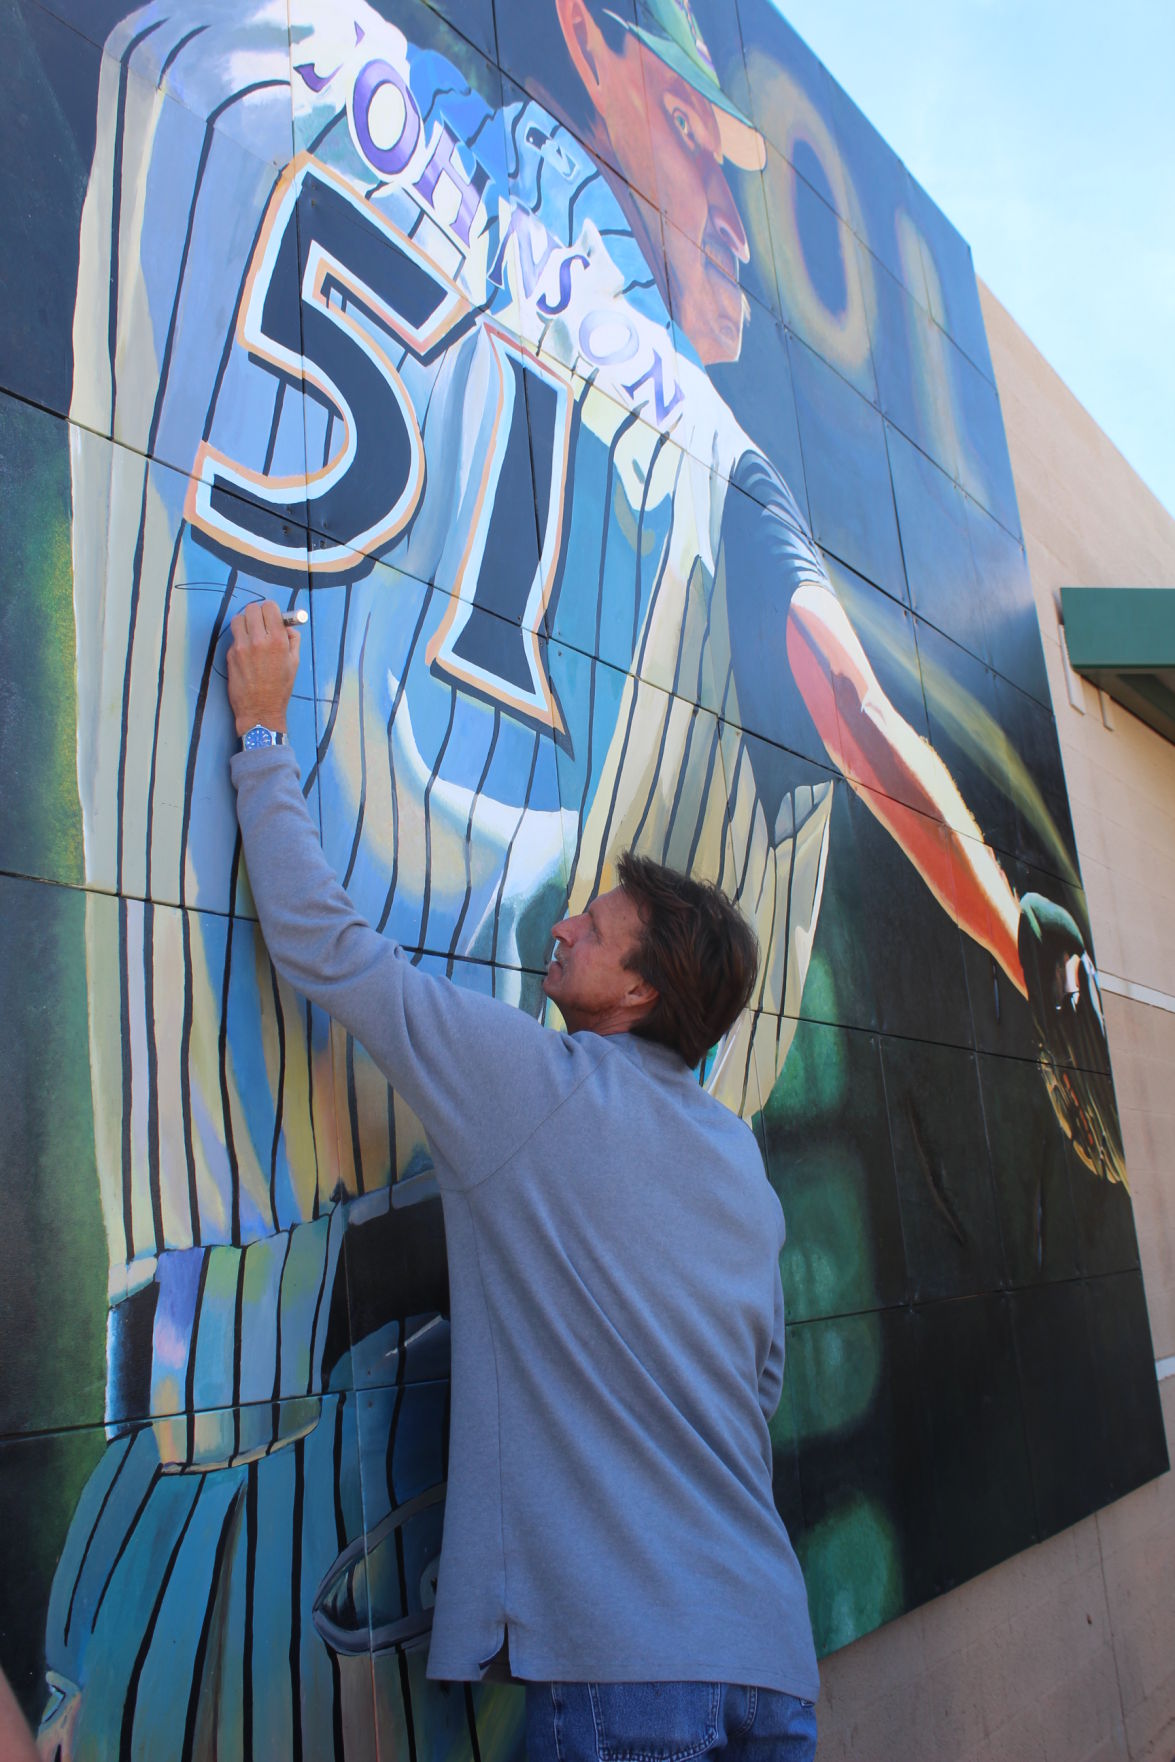 Peoria High School students honor Randy Johnson with mural